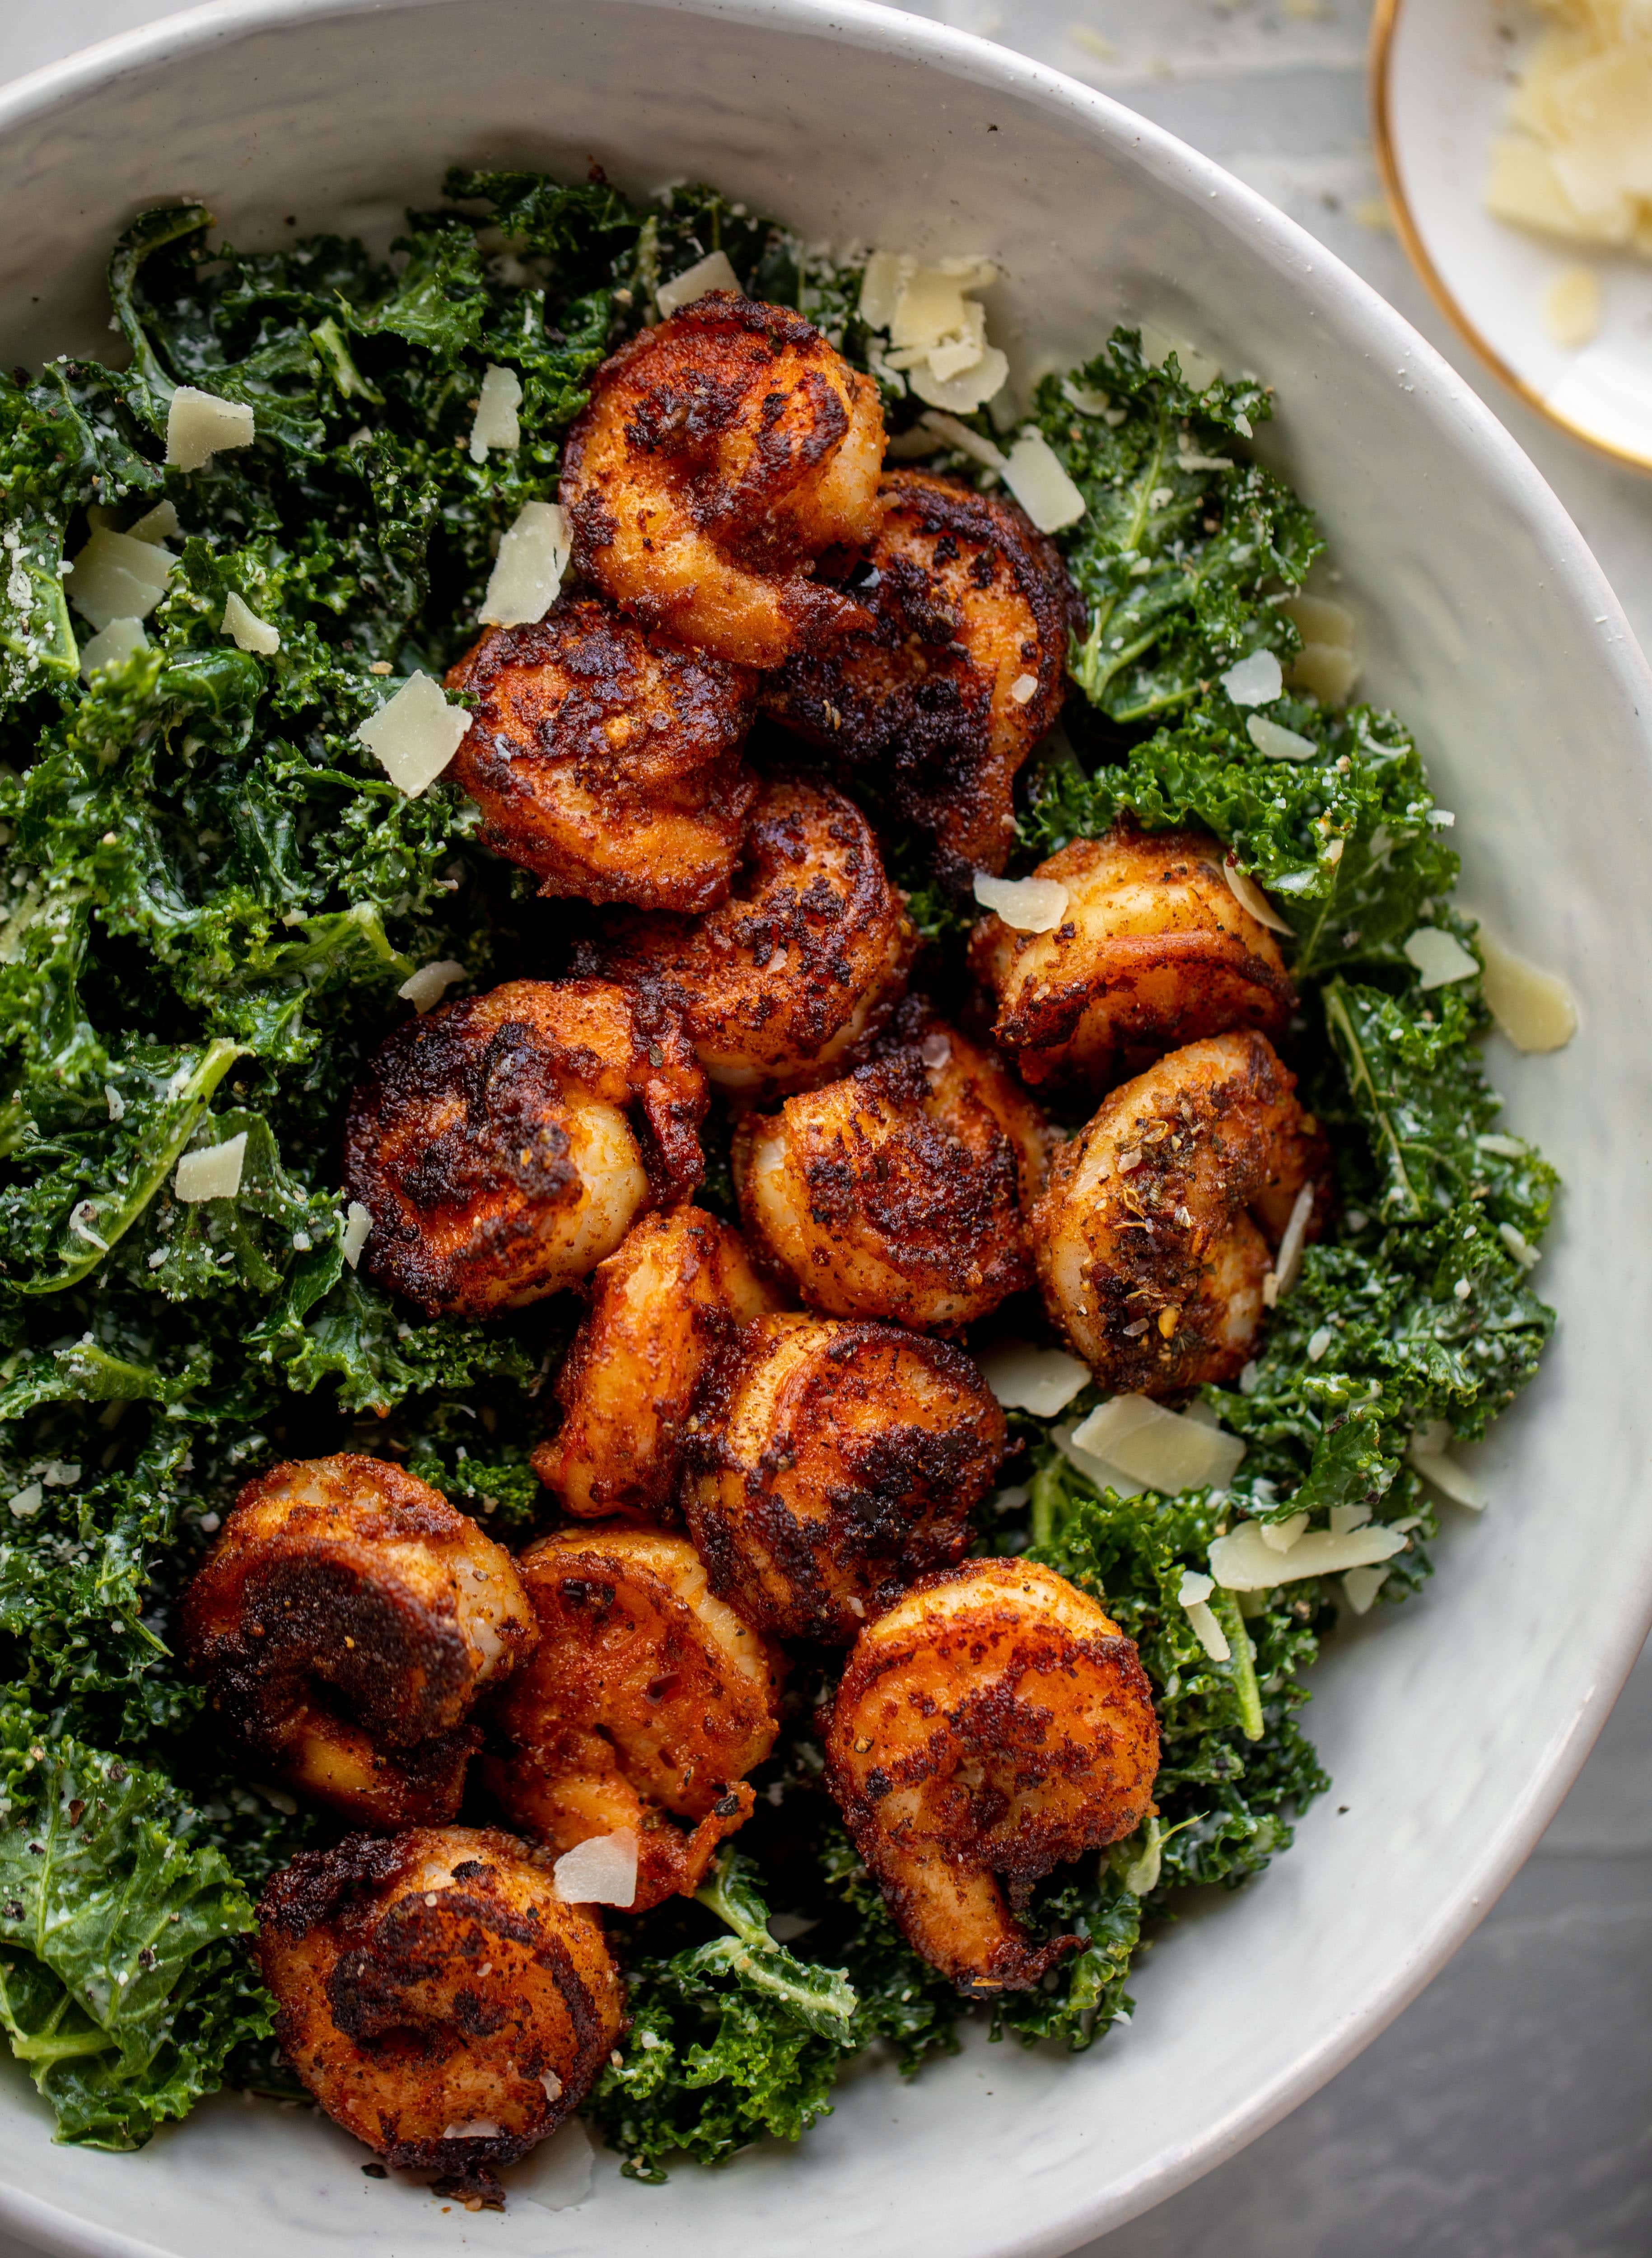 This blackened shrimp kale caesar is loaded with flavor. Spiced, buttery shrimp pan fried until golden, then thrown on kale caesar salad. Delish!